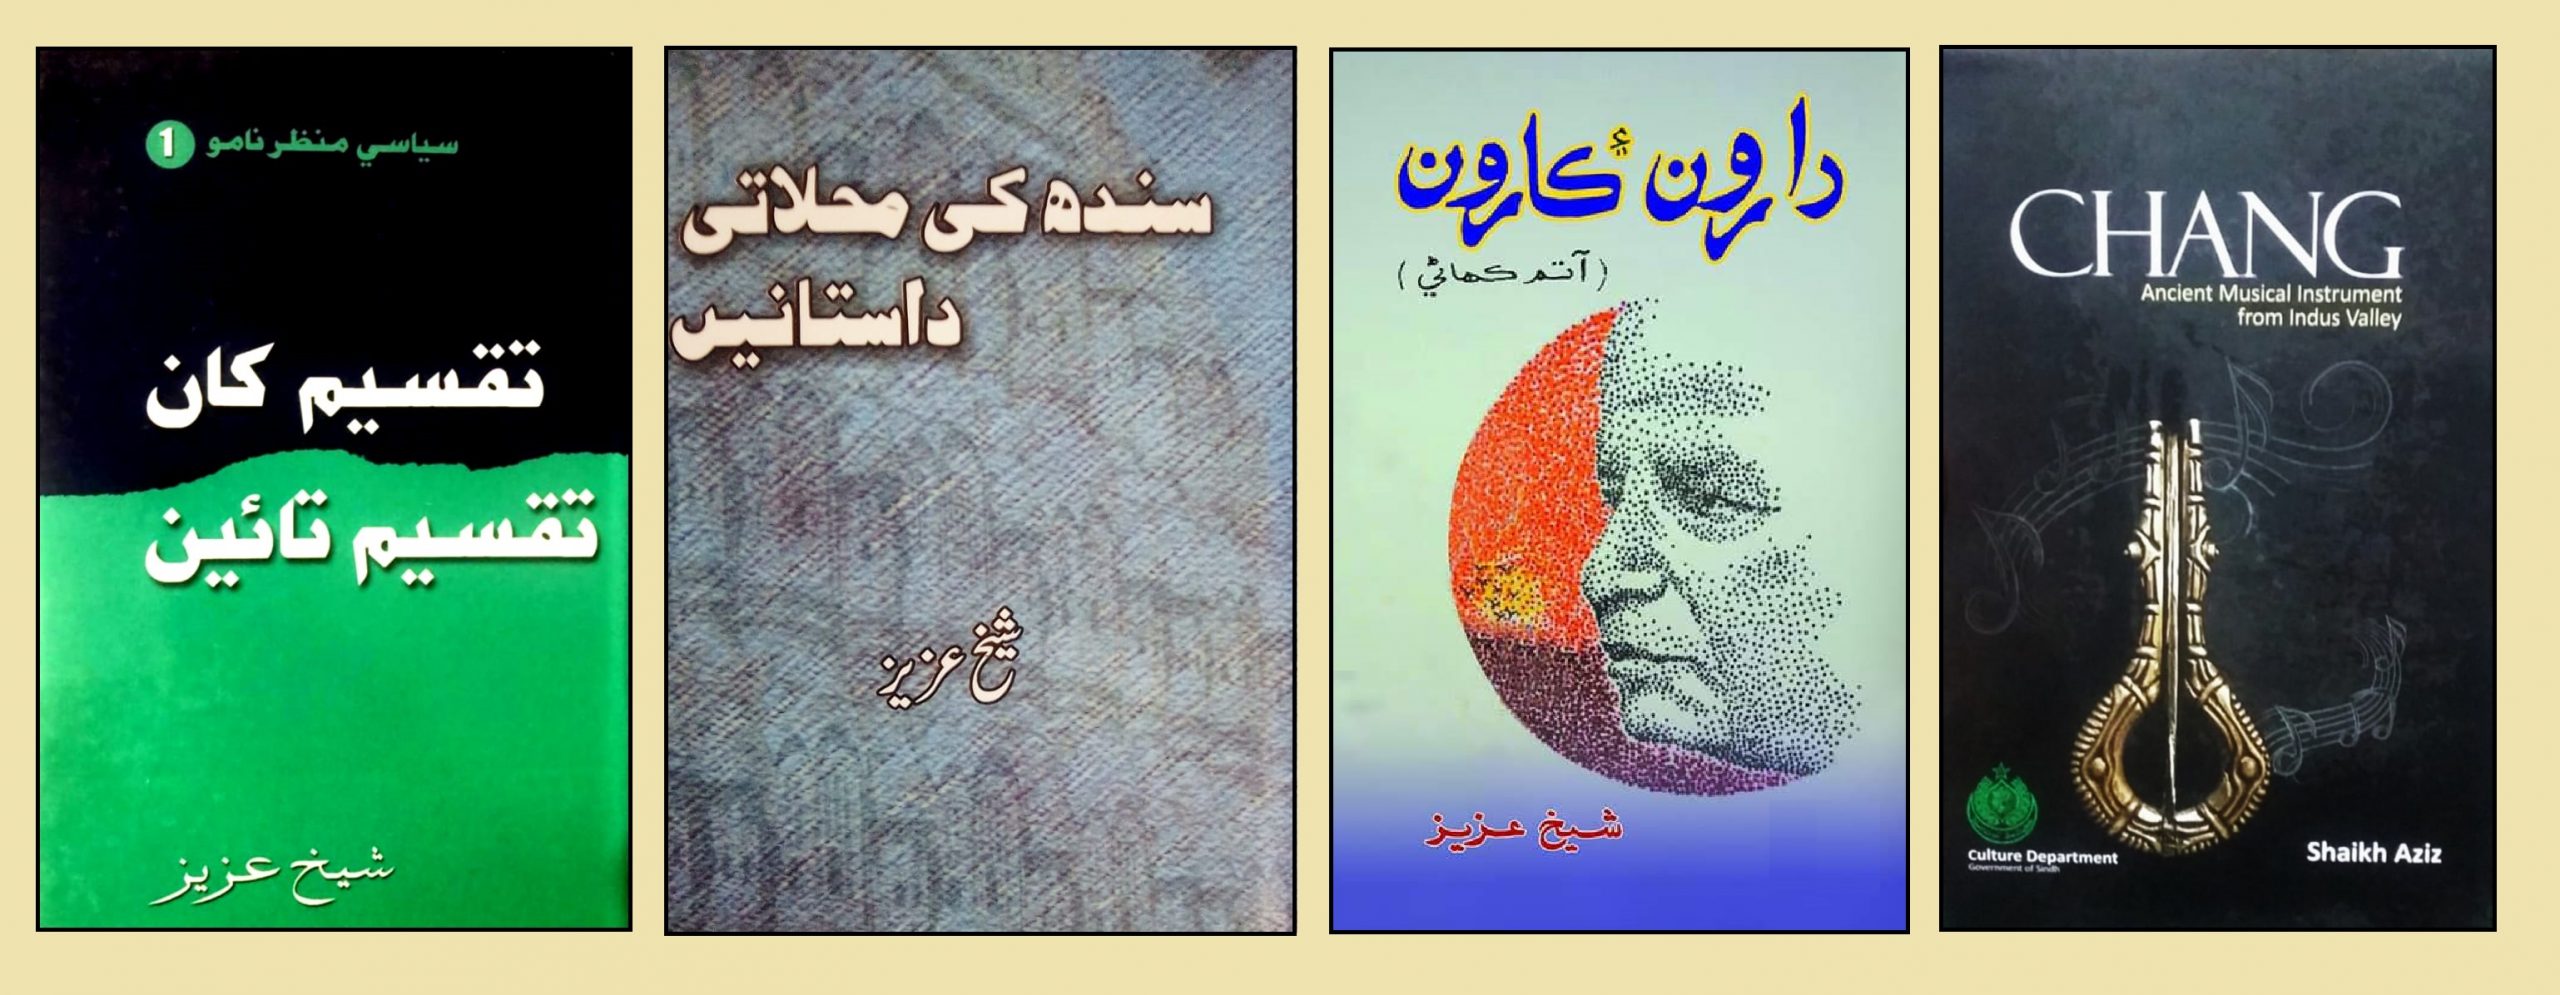 Some of the books covers of the books, written by Shaikh Aziz